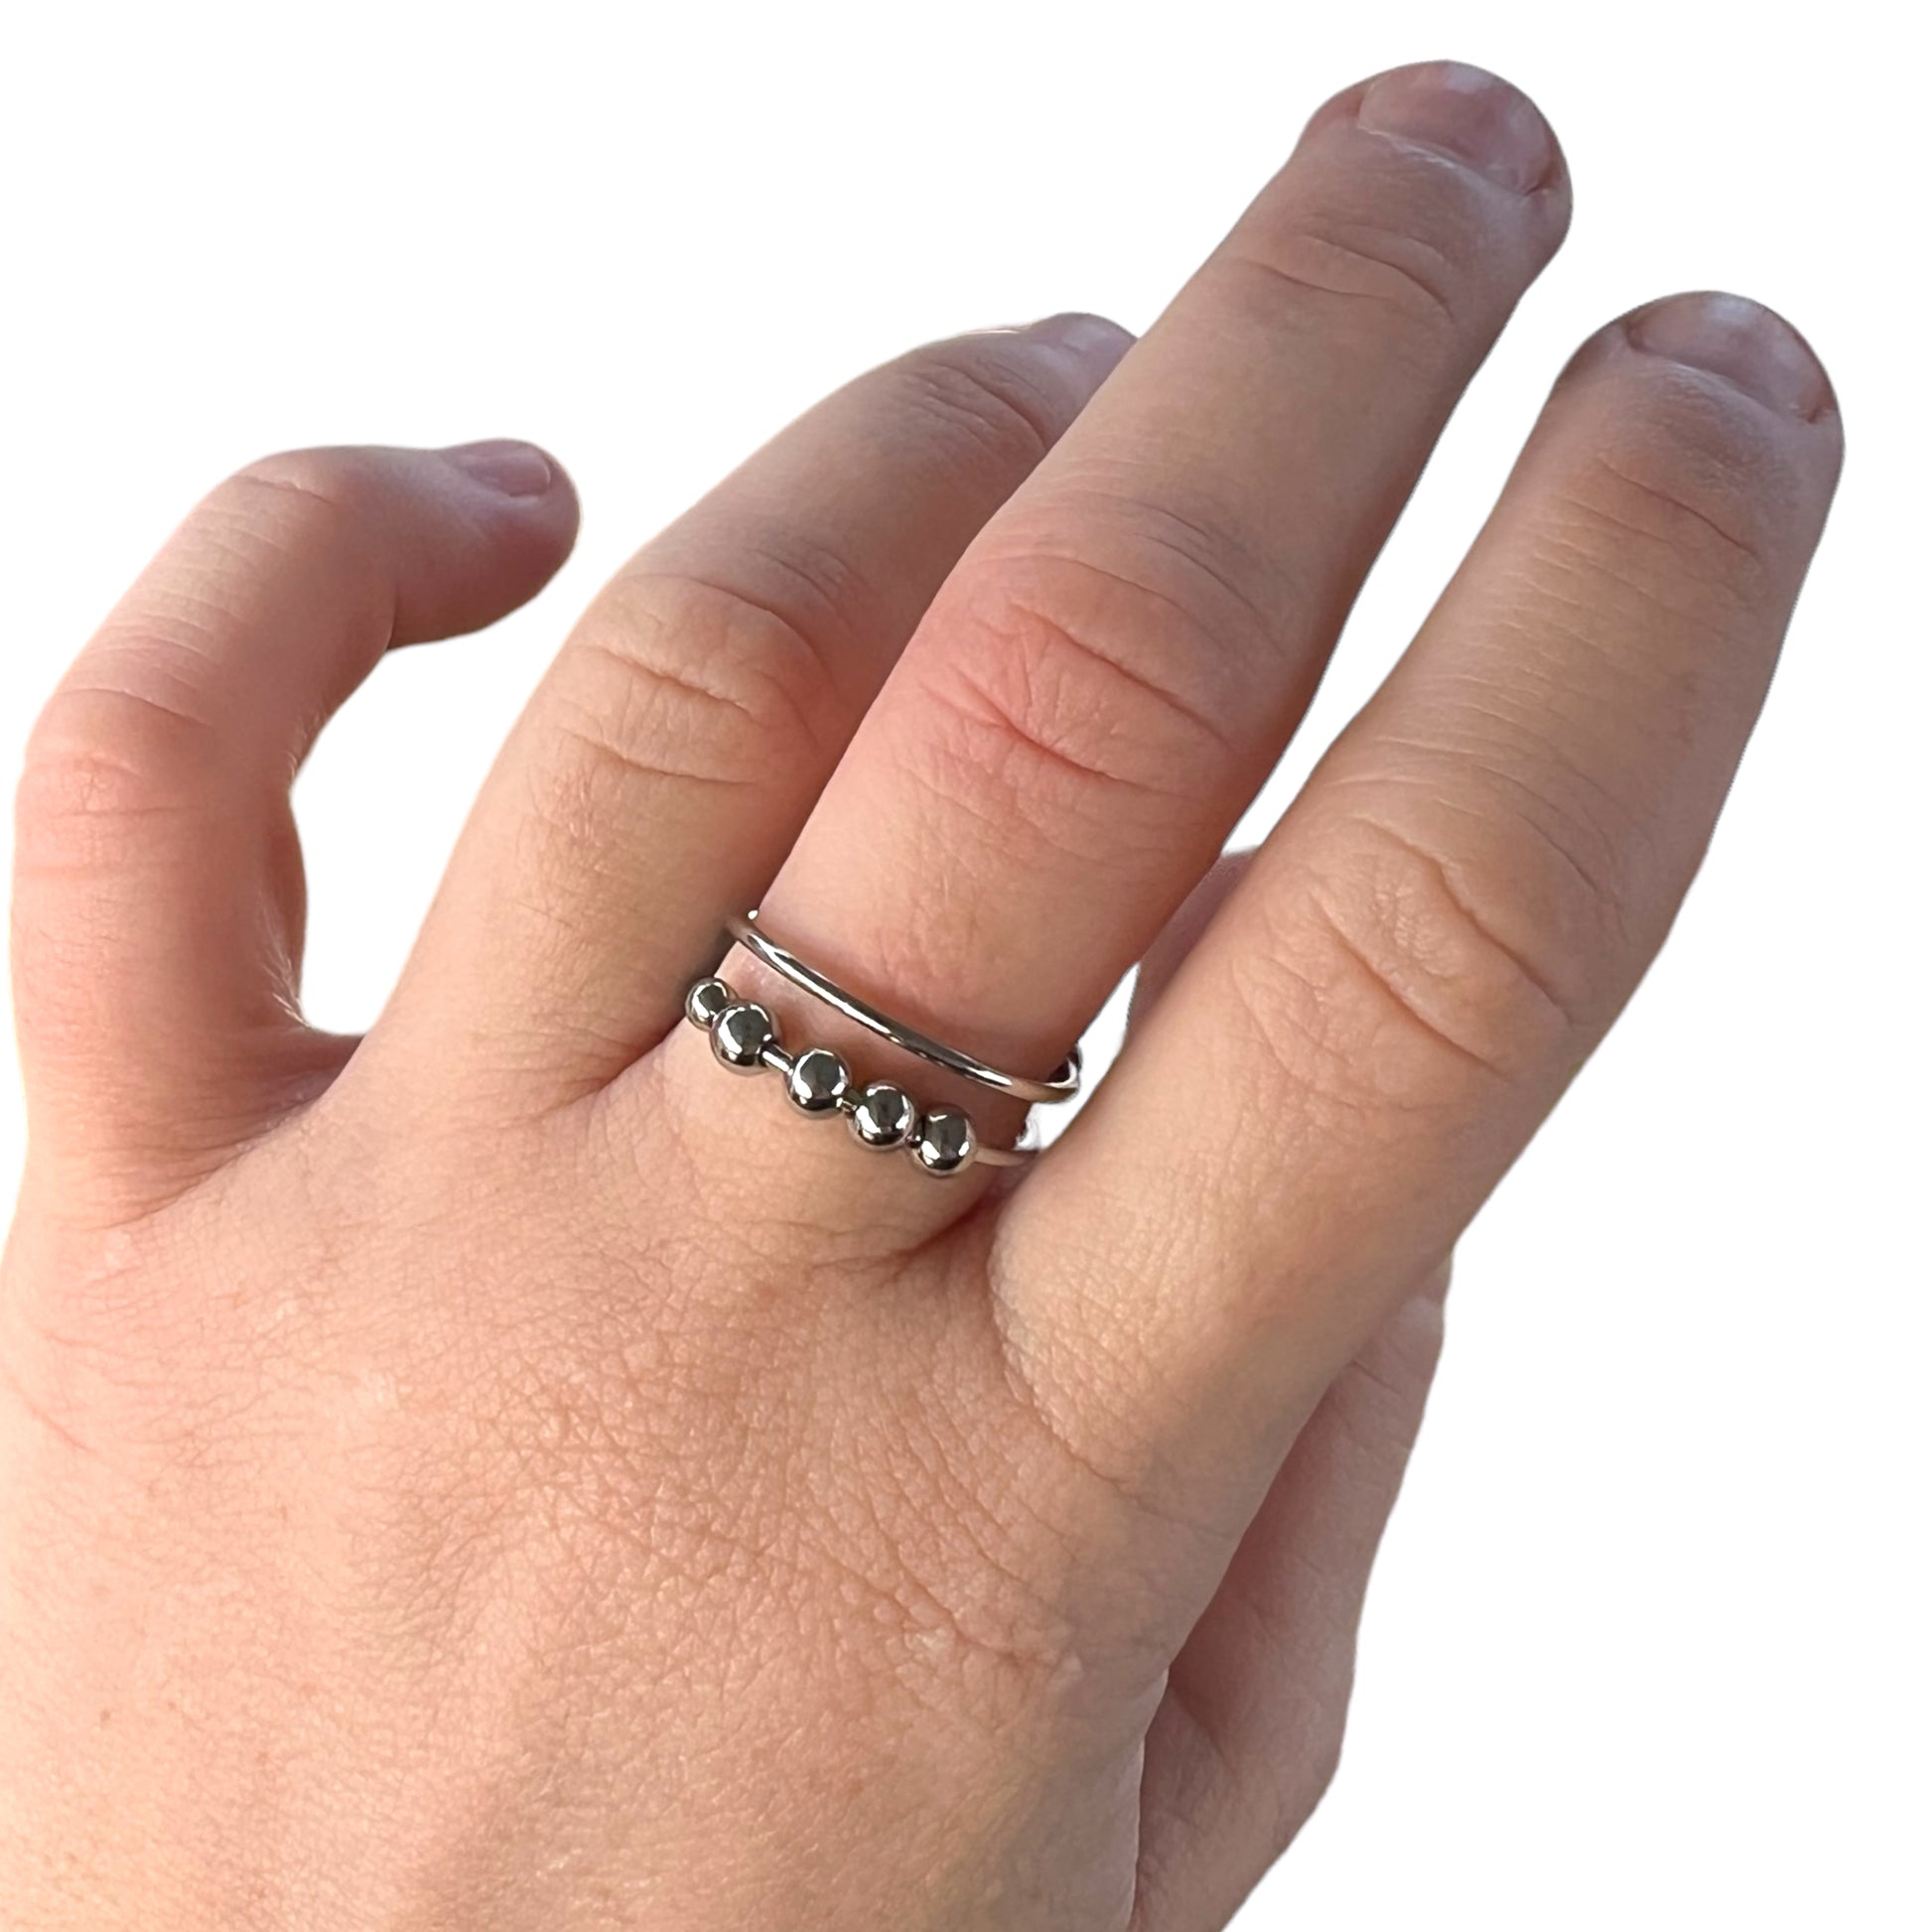 Adjustable Rings with Beads  Fidget Rings - Sensory Stand